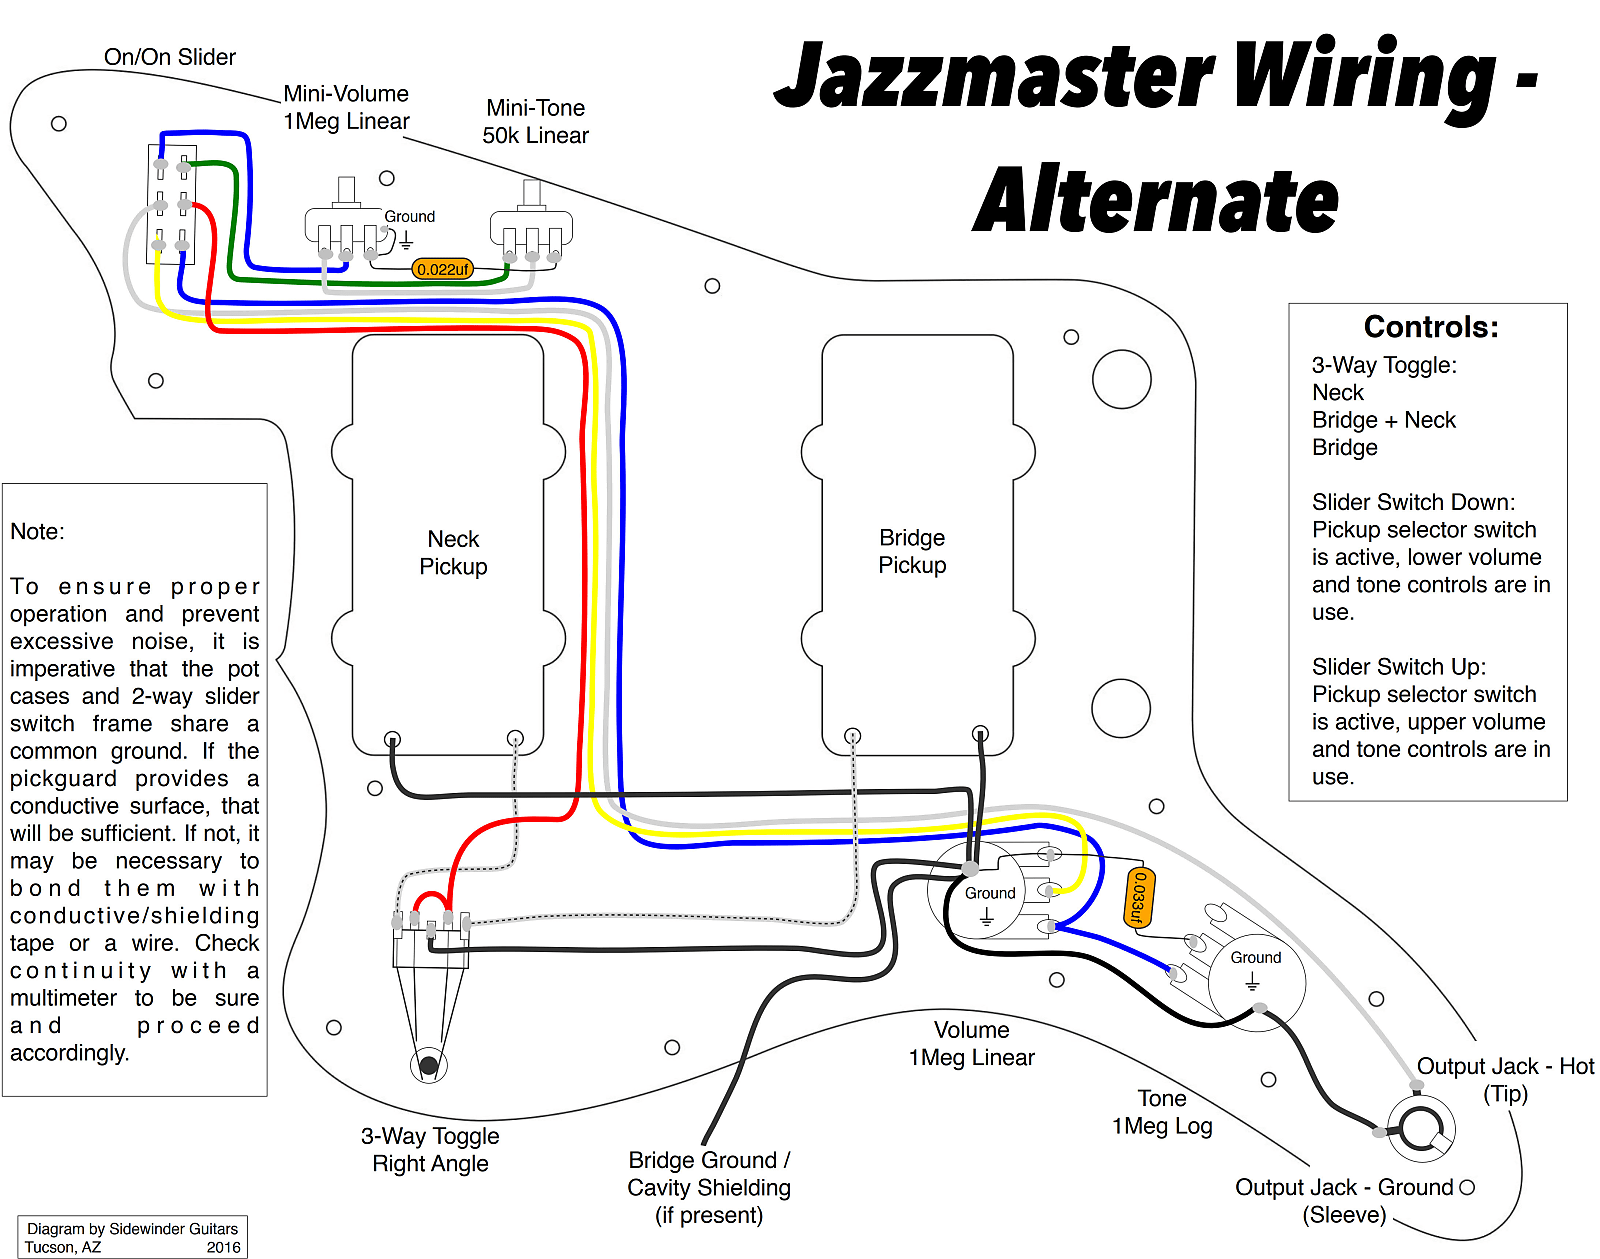 Wiring modifications diagram for Jazzmaster, by Sidewinder Guitars